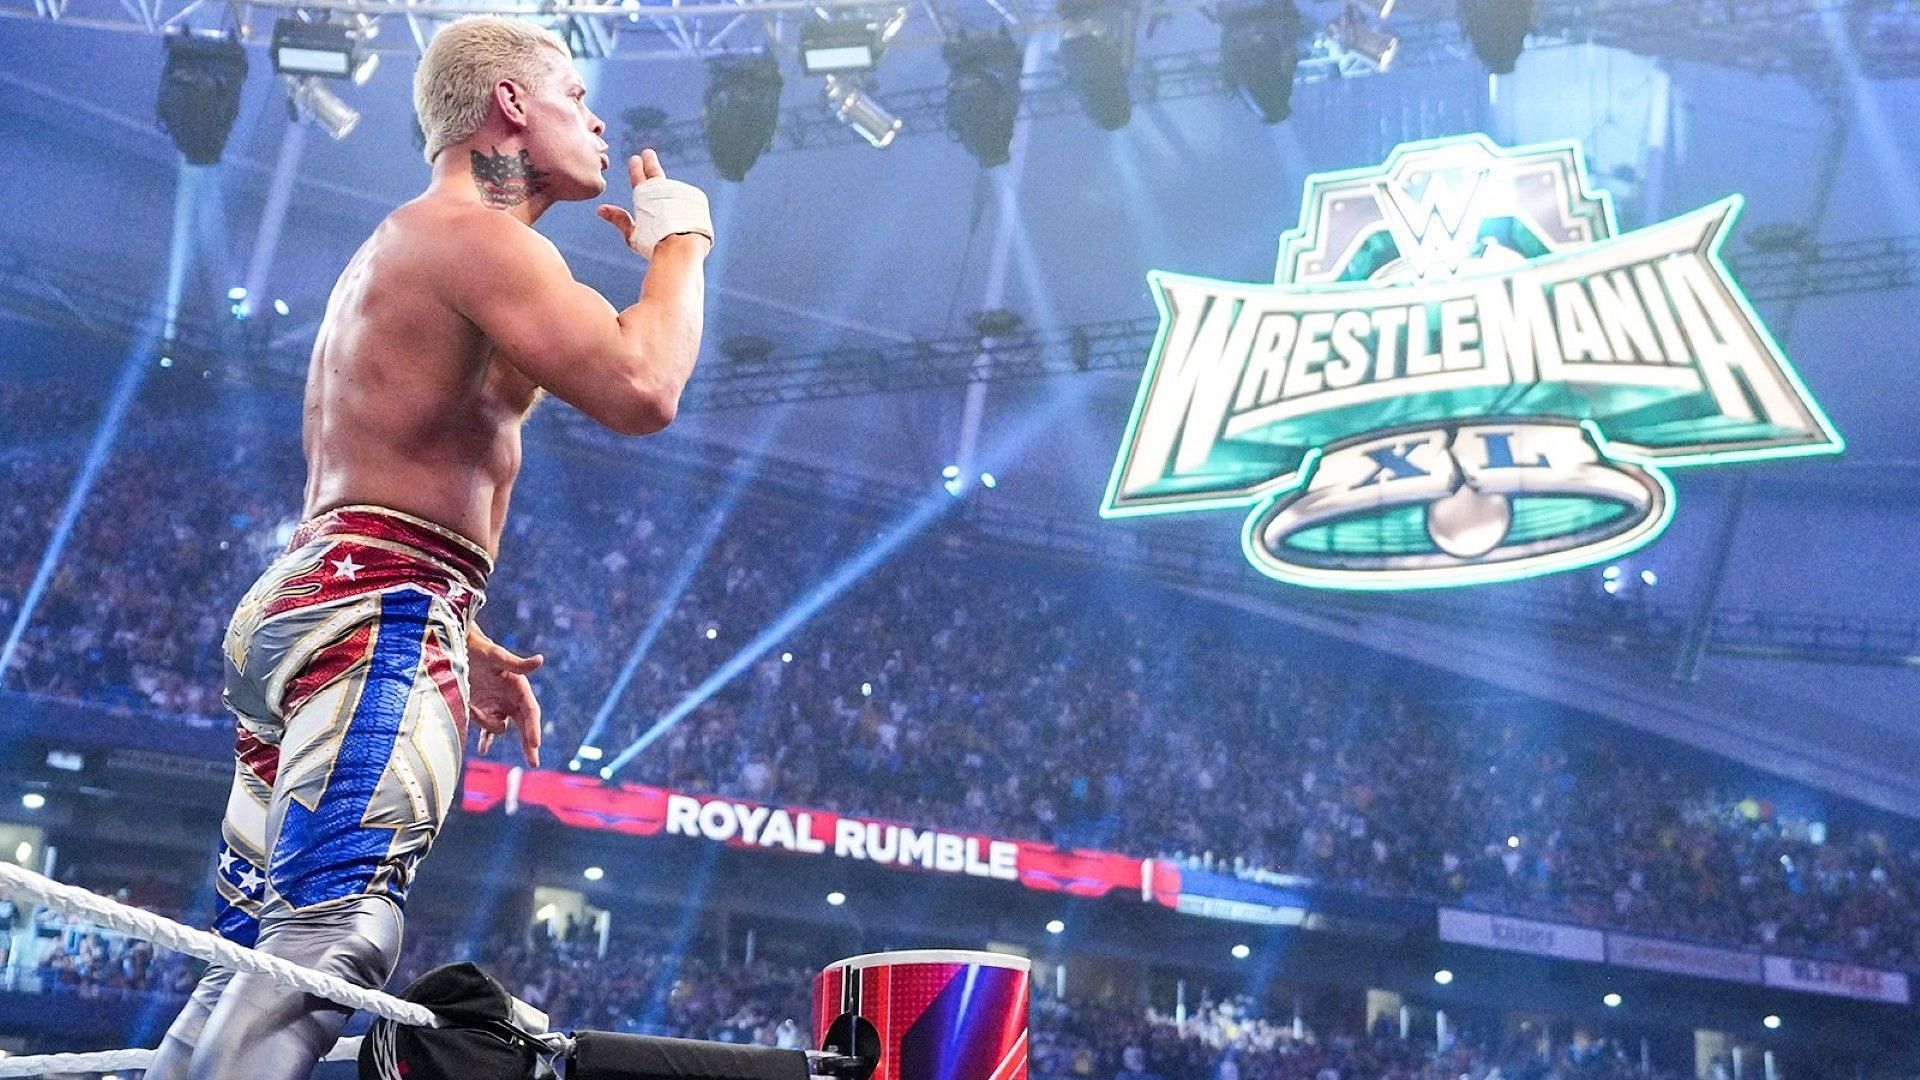 Cody Rhodes wins WWE Royal Rumble and points ahead to WrestleMania 40